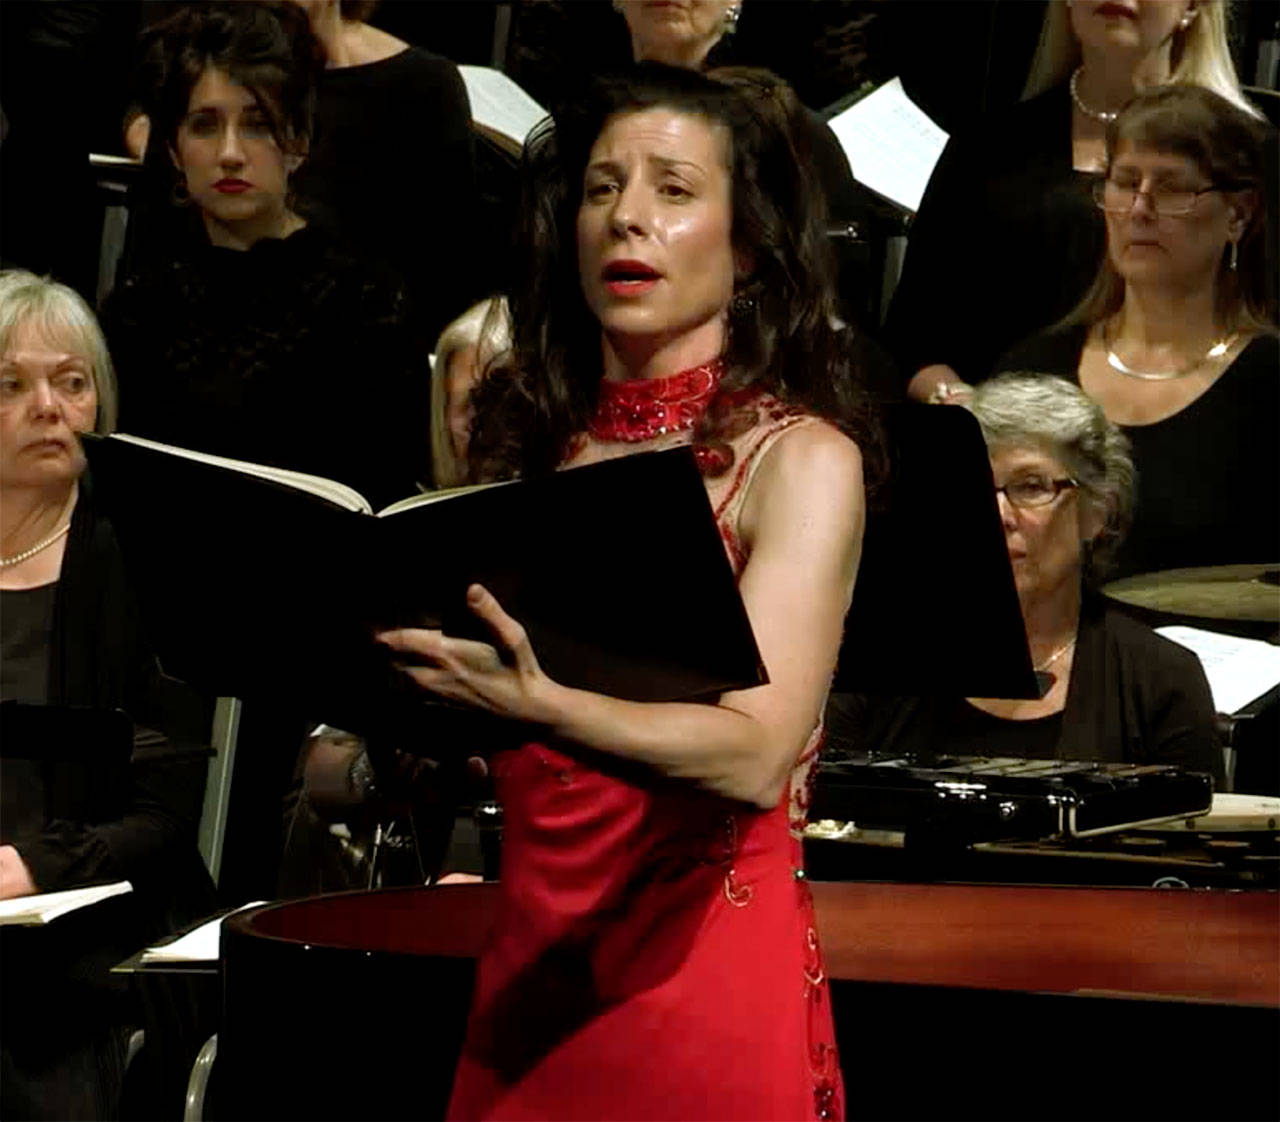 Vashon Opera co-founder Jennifer Krikawa sings with the Vashon Island Chorale in the debut performance at the Katherine L White Hall, in 2016. The performance is now available for free on Vashon Center for the Arts T.V., at vashoncenterforthearts.org (Photo from video by Peter Ray and Michael Monteleone for Voice of Vashon).